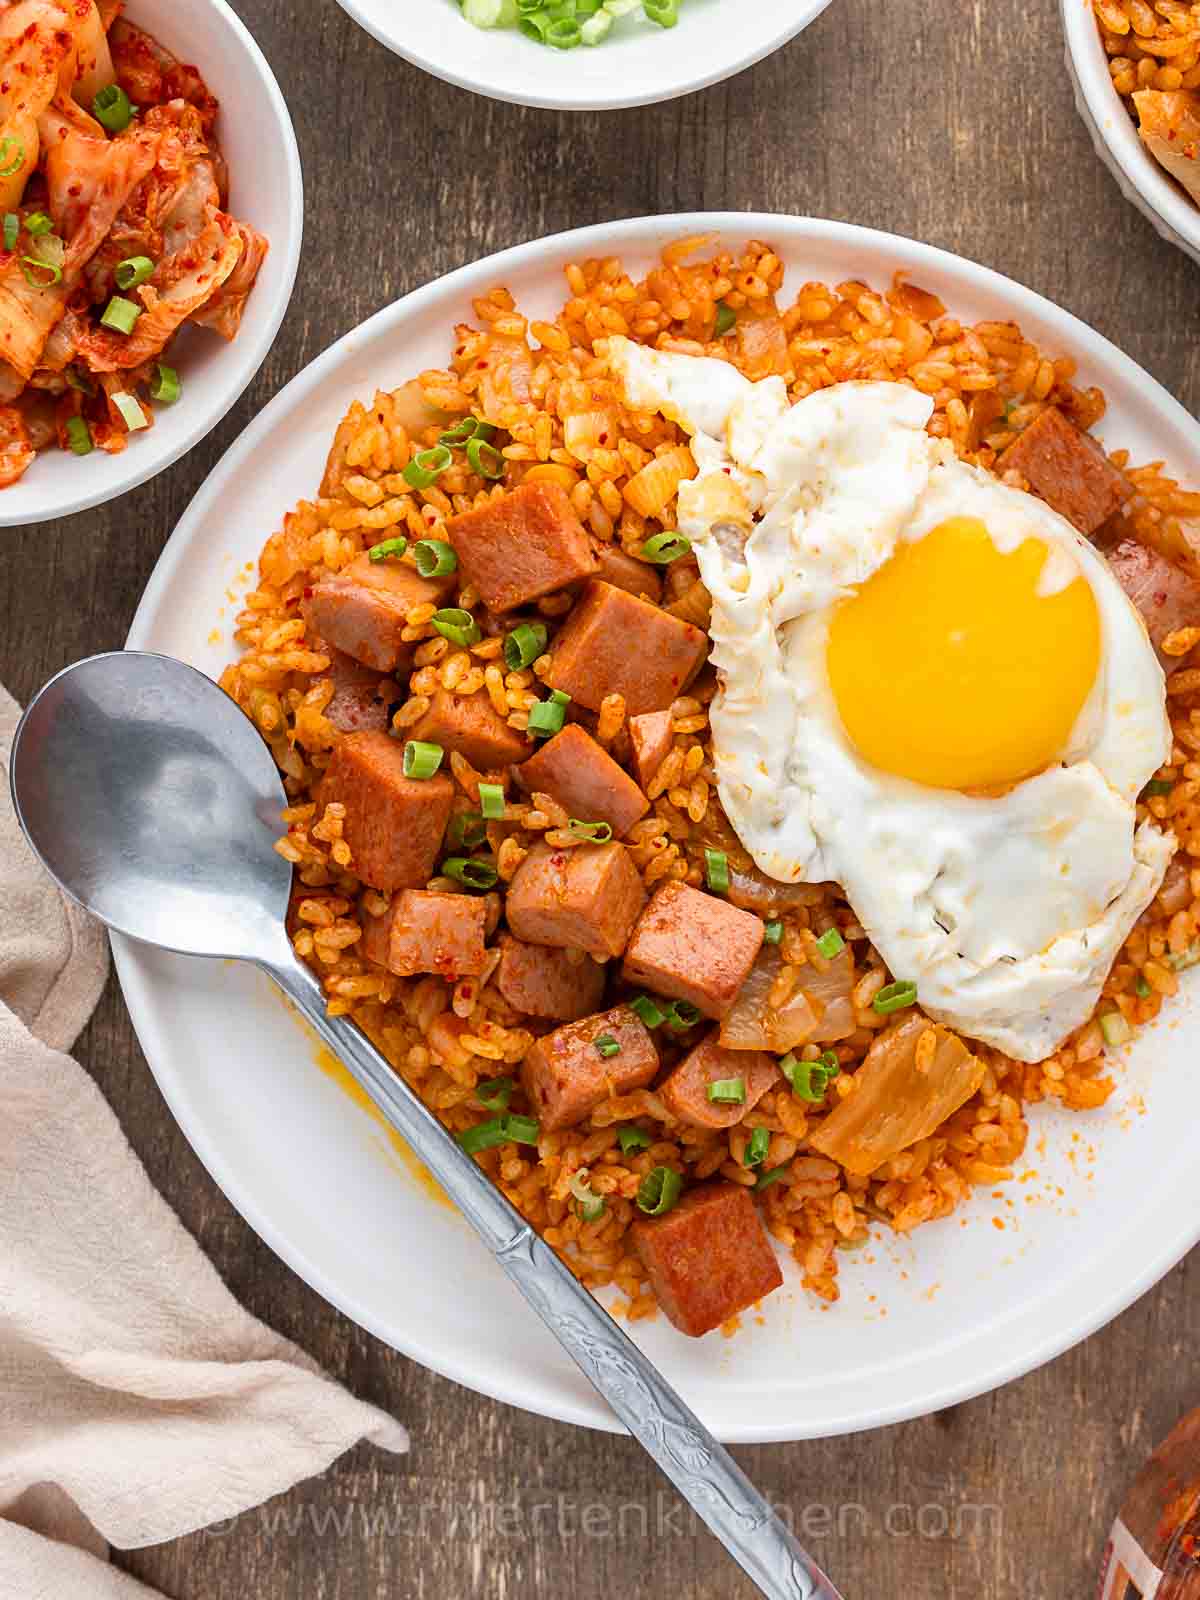 Korean kimchi fried rice with luncheon meat and sunny side eggs.